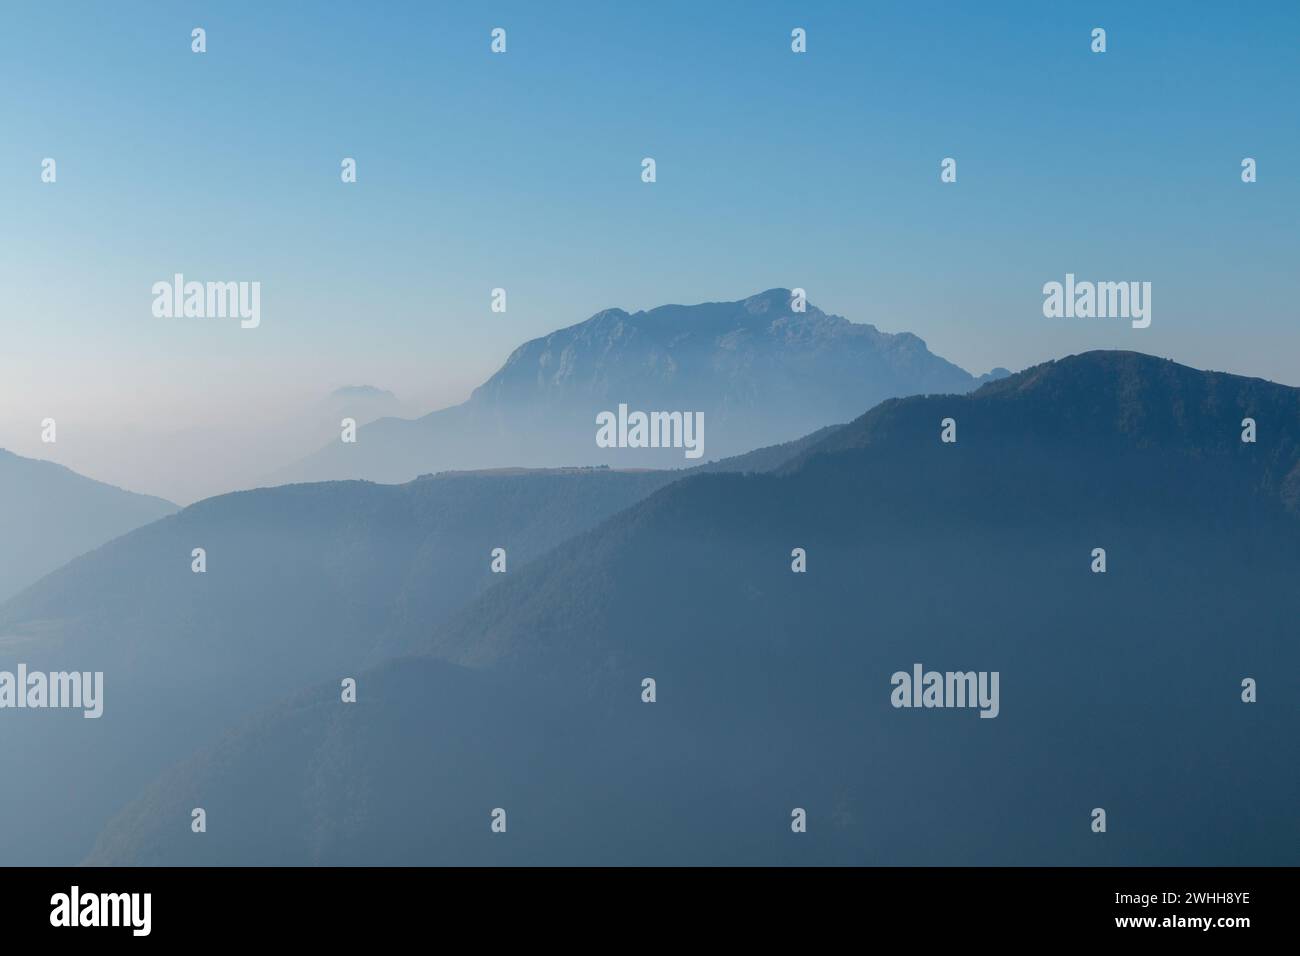 Spectacular mountain ranges silhouettes in morning. Stock Photo